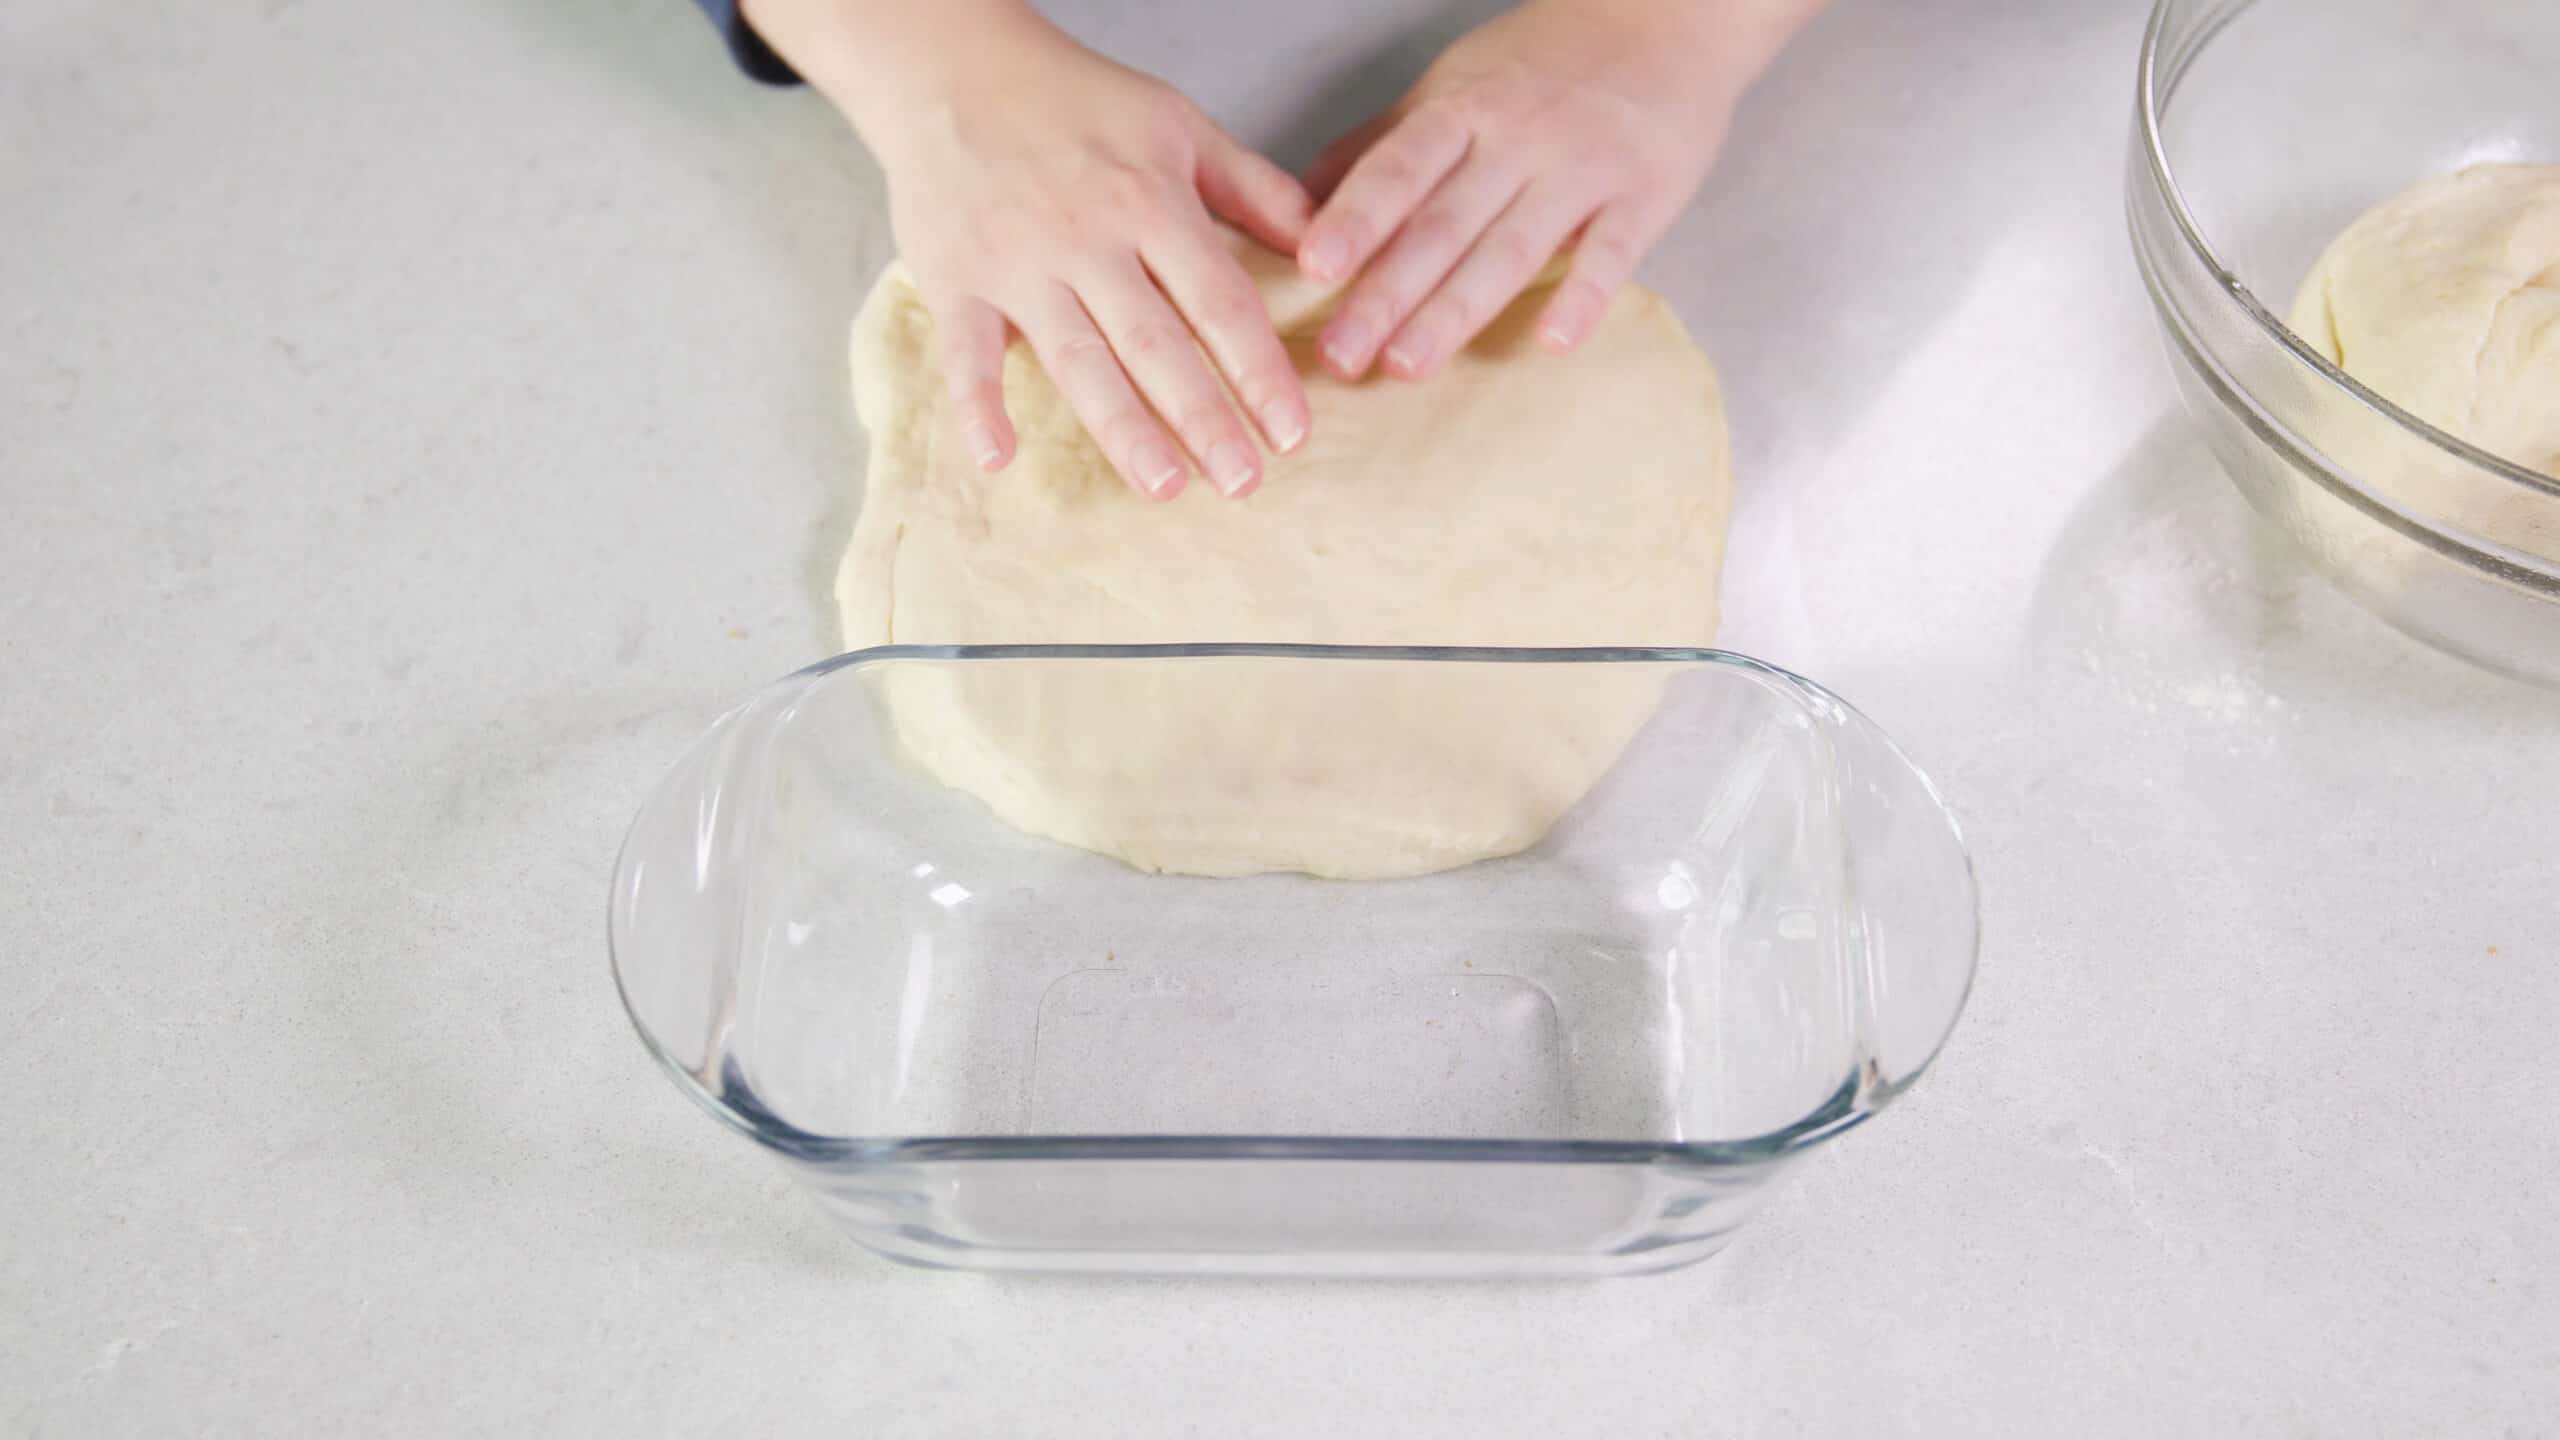 Overhead view of clean marble countertop with a clear glass bread pan used to reference correct width for the loaf in front of rolled out bread dough.